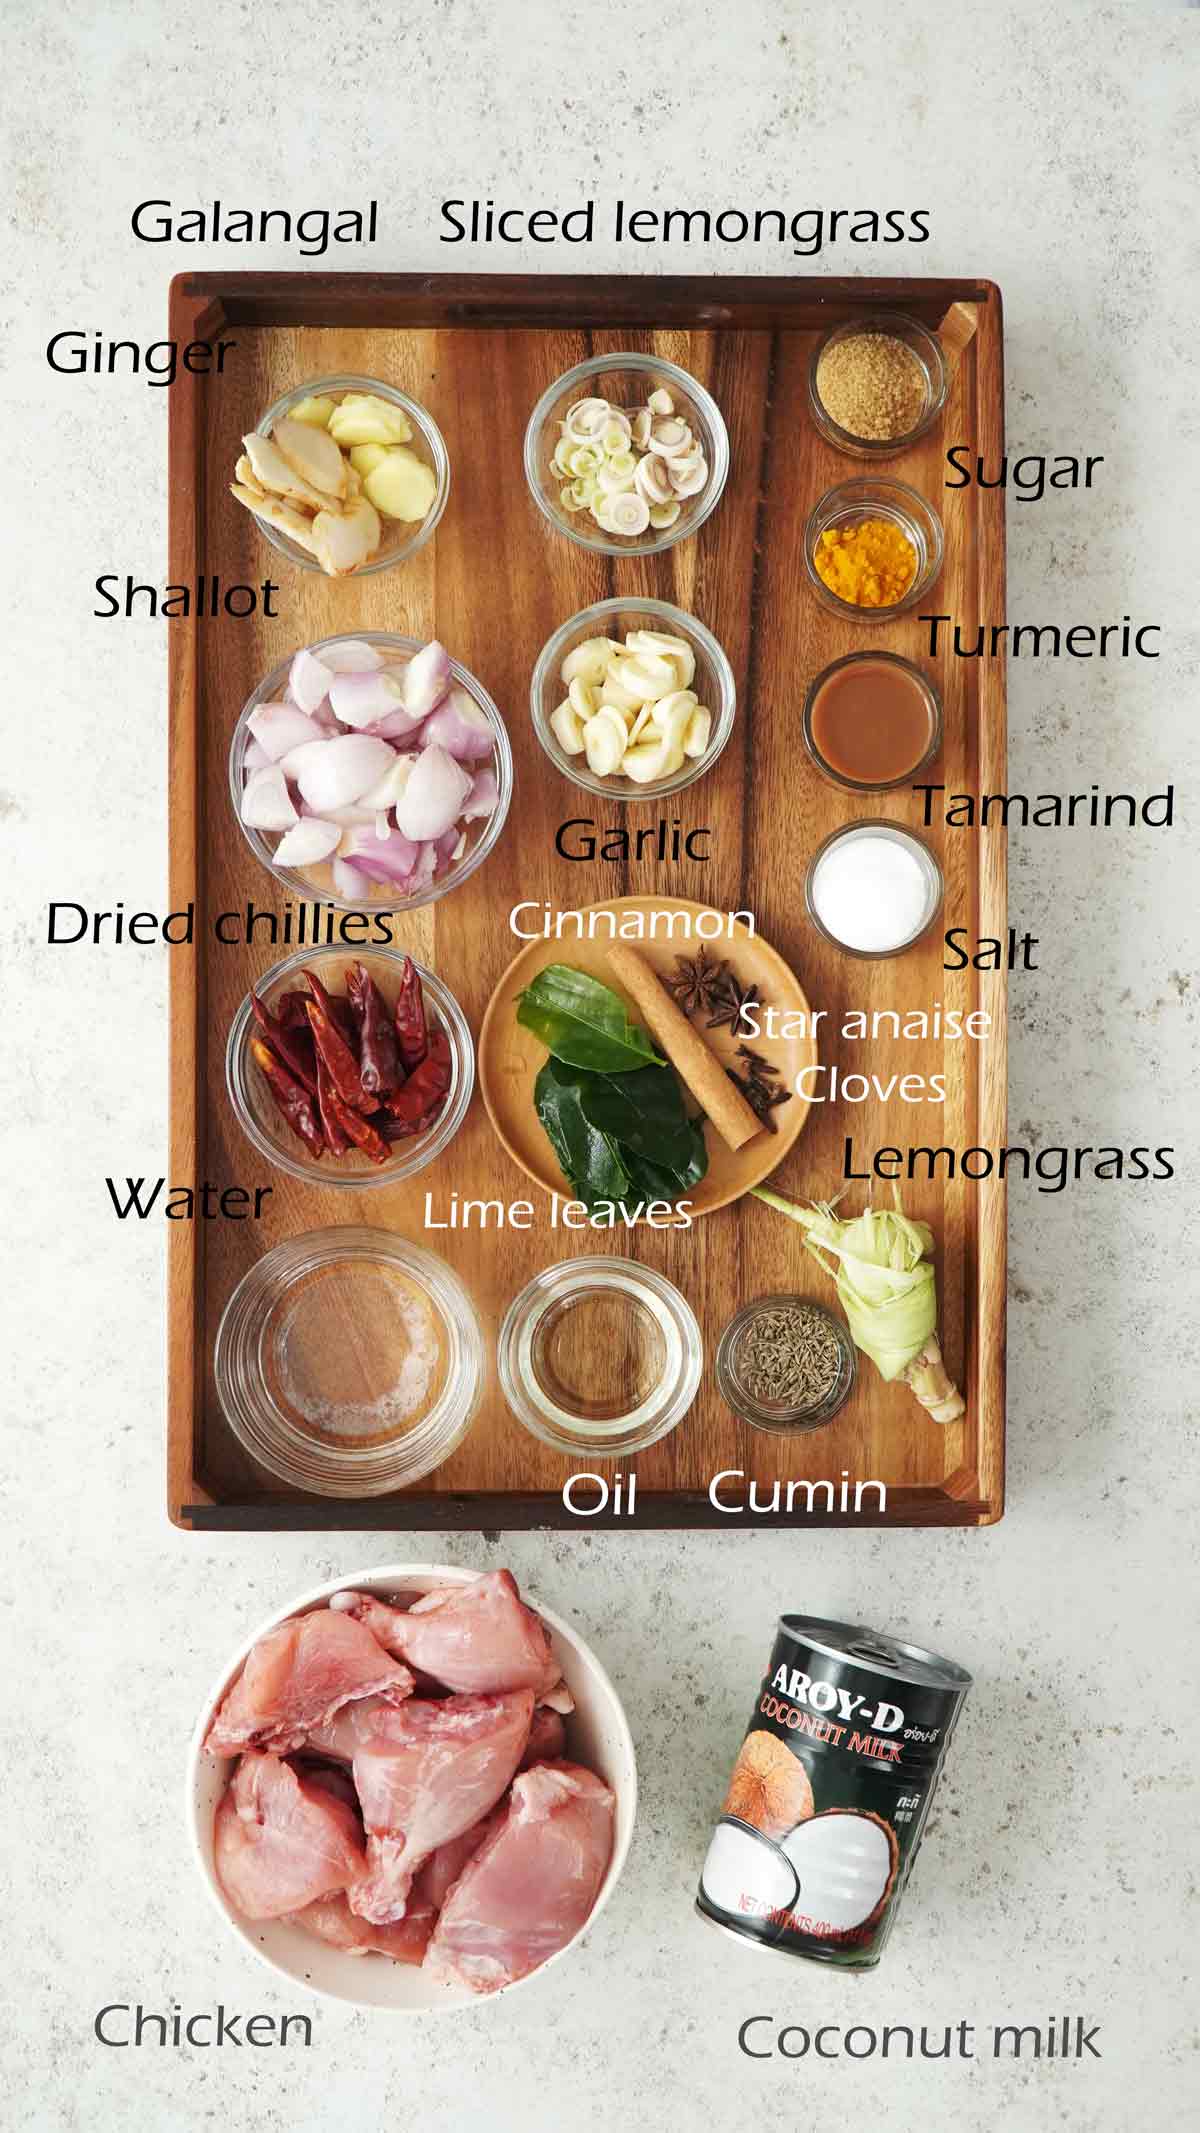 Labelled ingredients displayed on the white table.